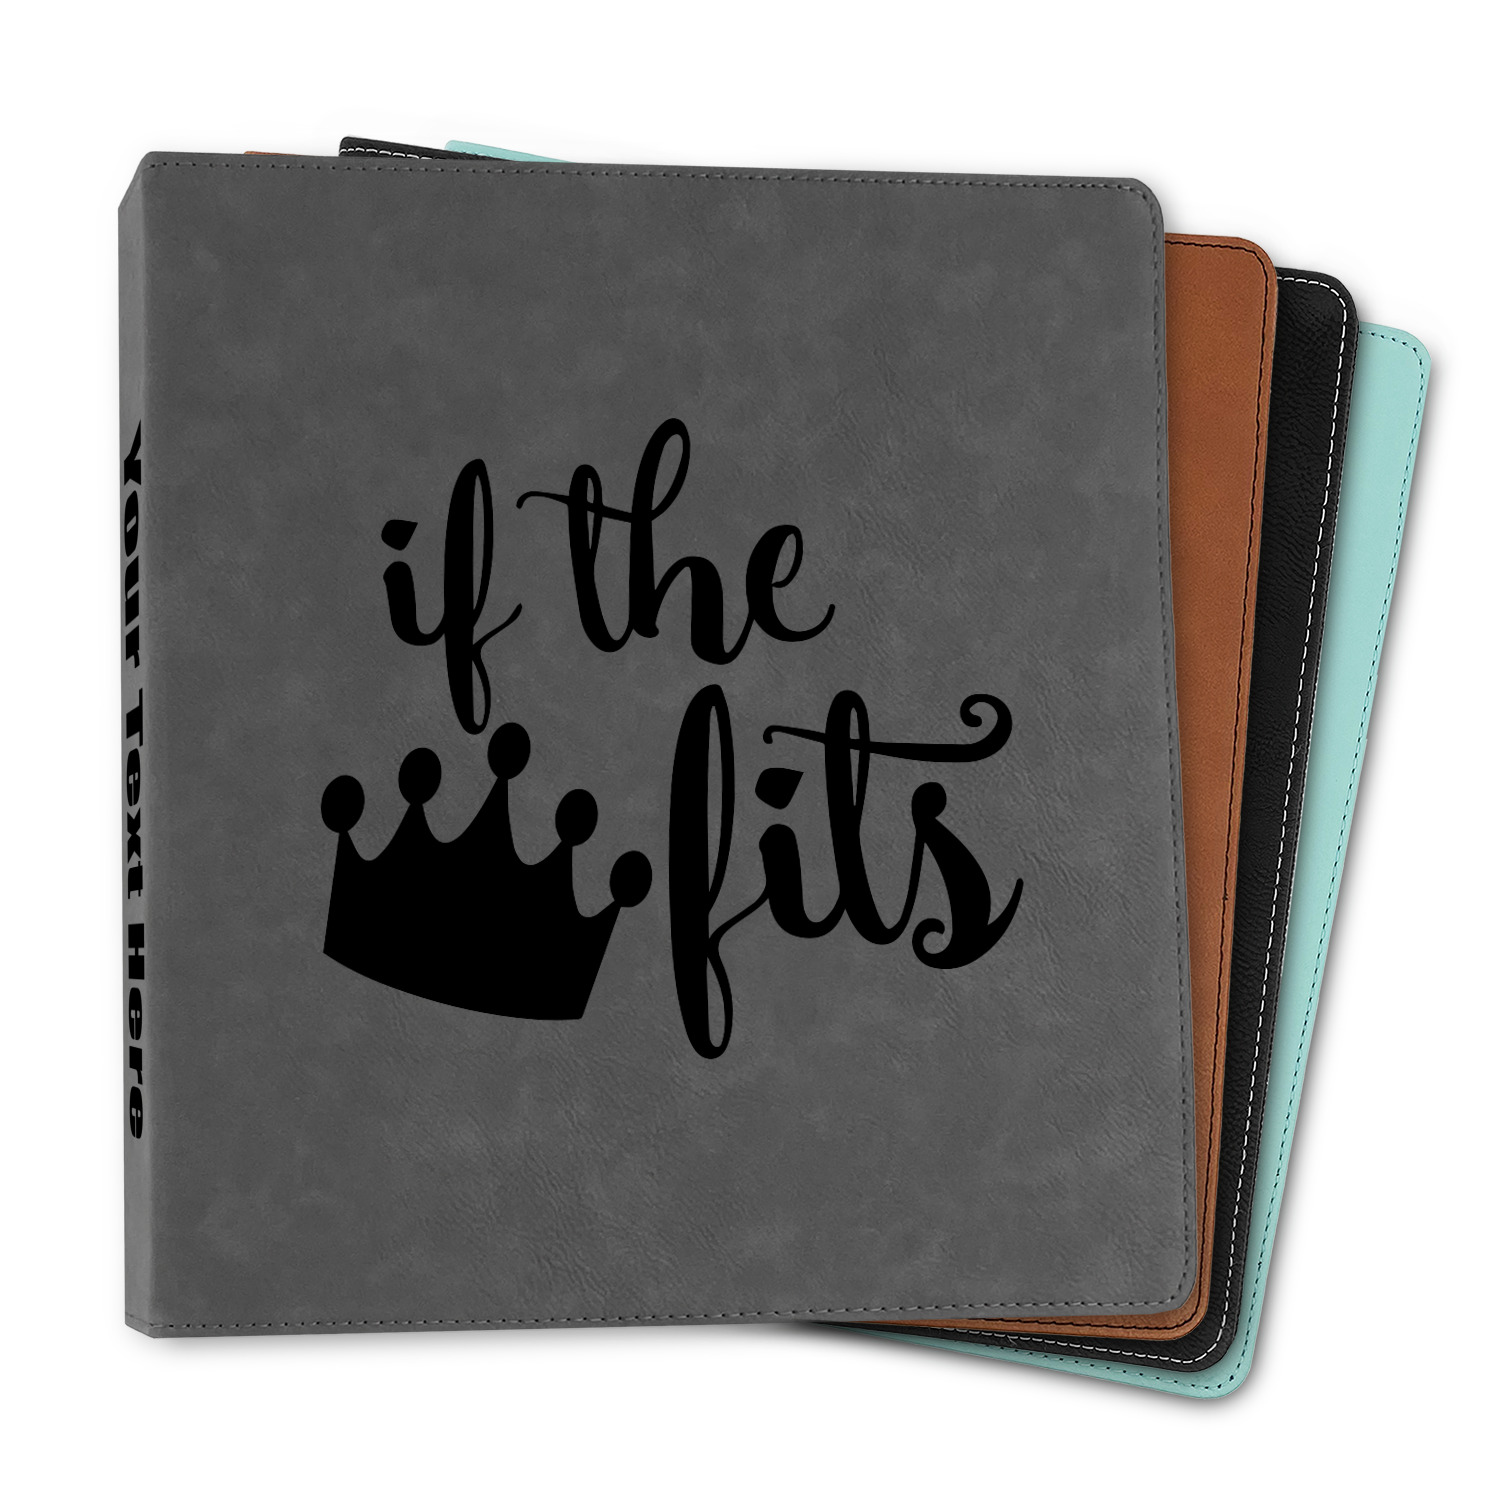 https://www.youcustomizeit.com/common/MAKE/1038314/Princess-Quotes-and-Sayings-Leather-Binders-1-Color-Options.jpg?lm=1655153337